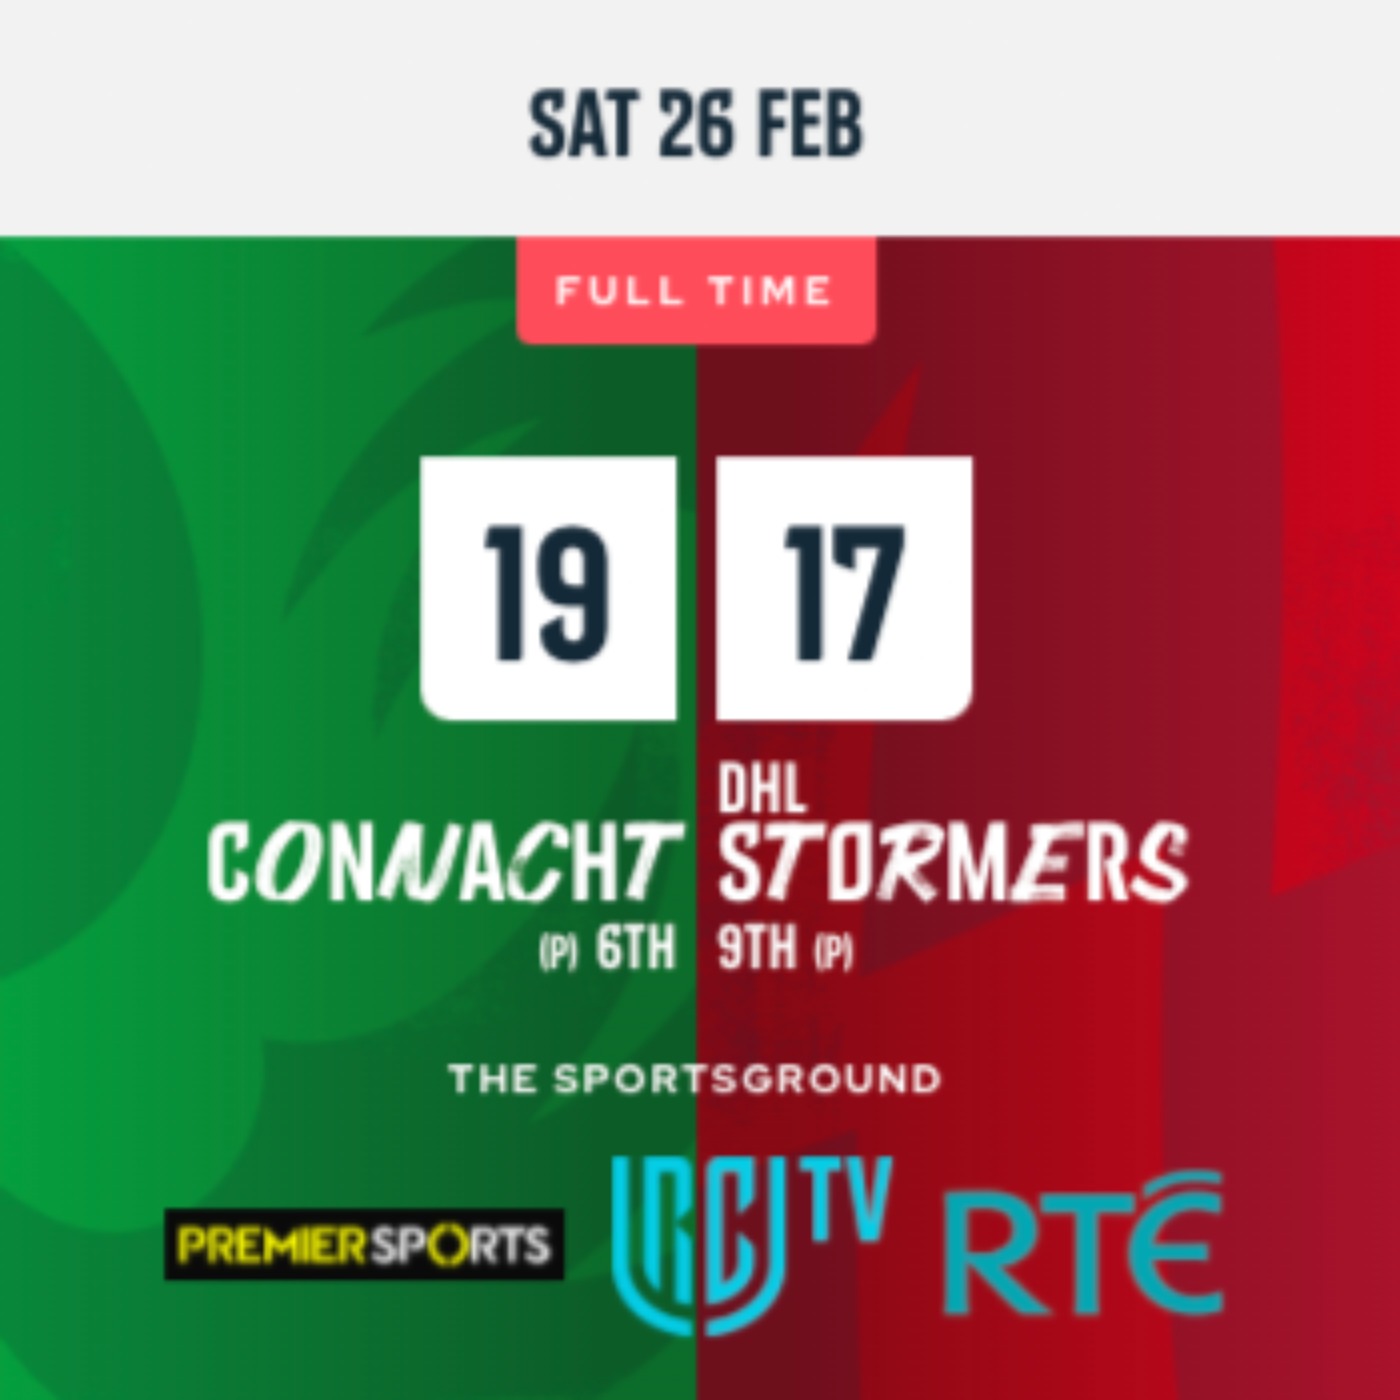 Stormers home review Feb 2022